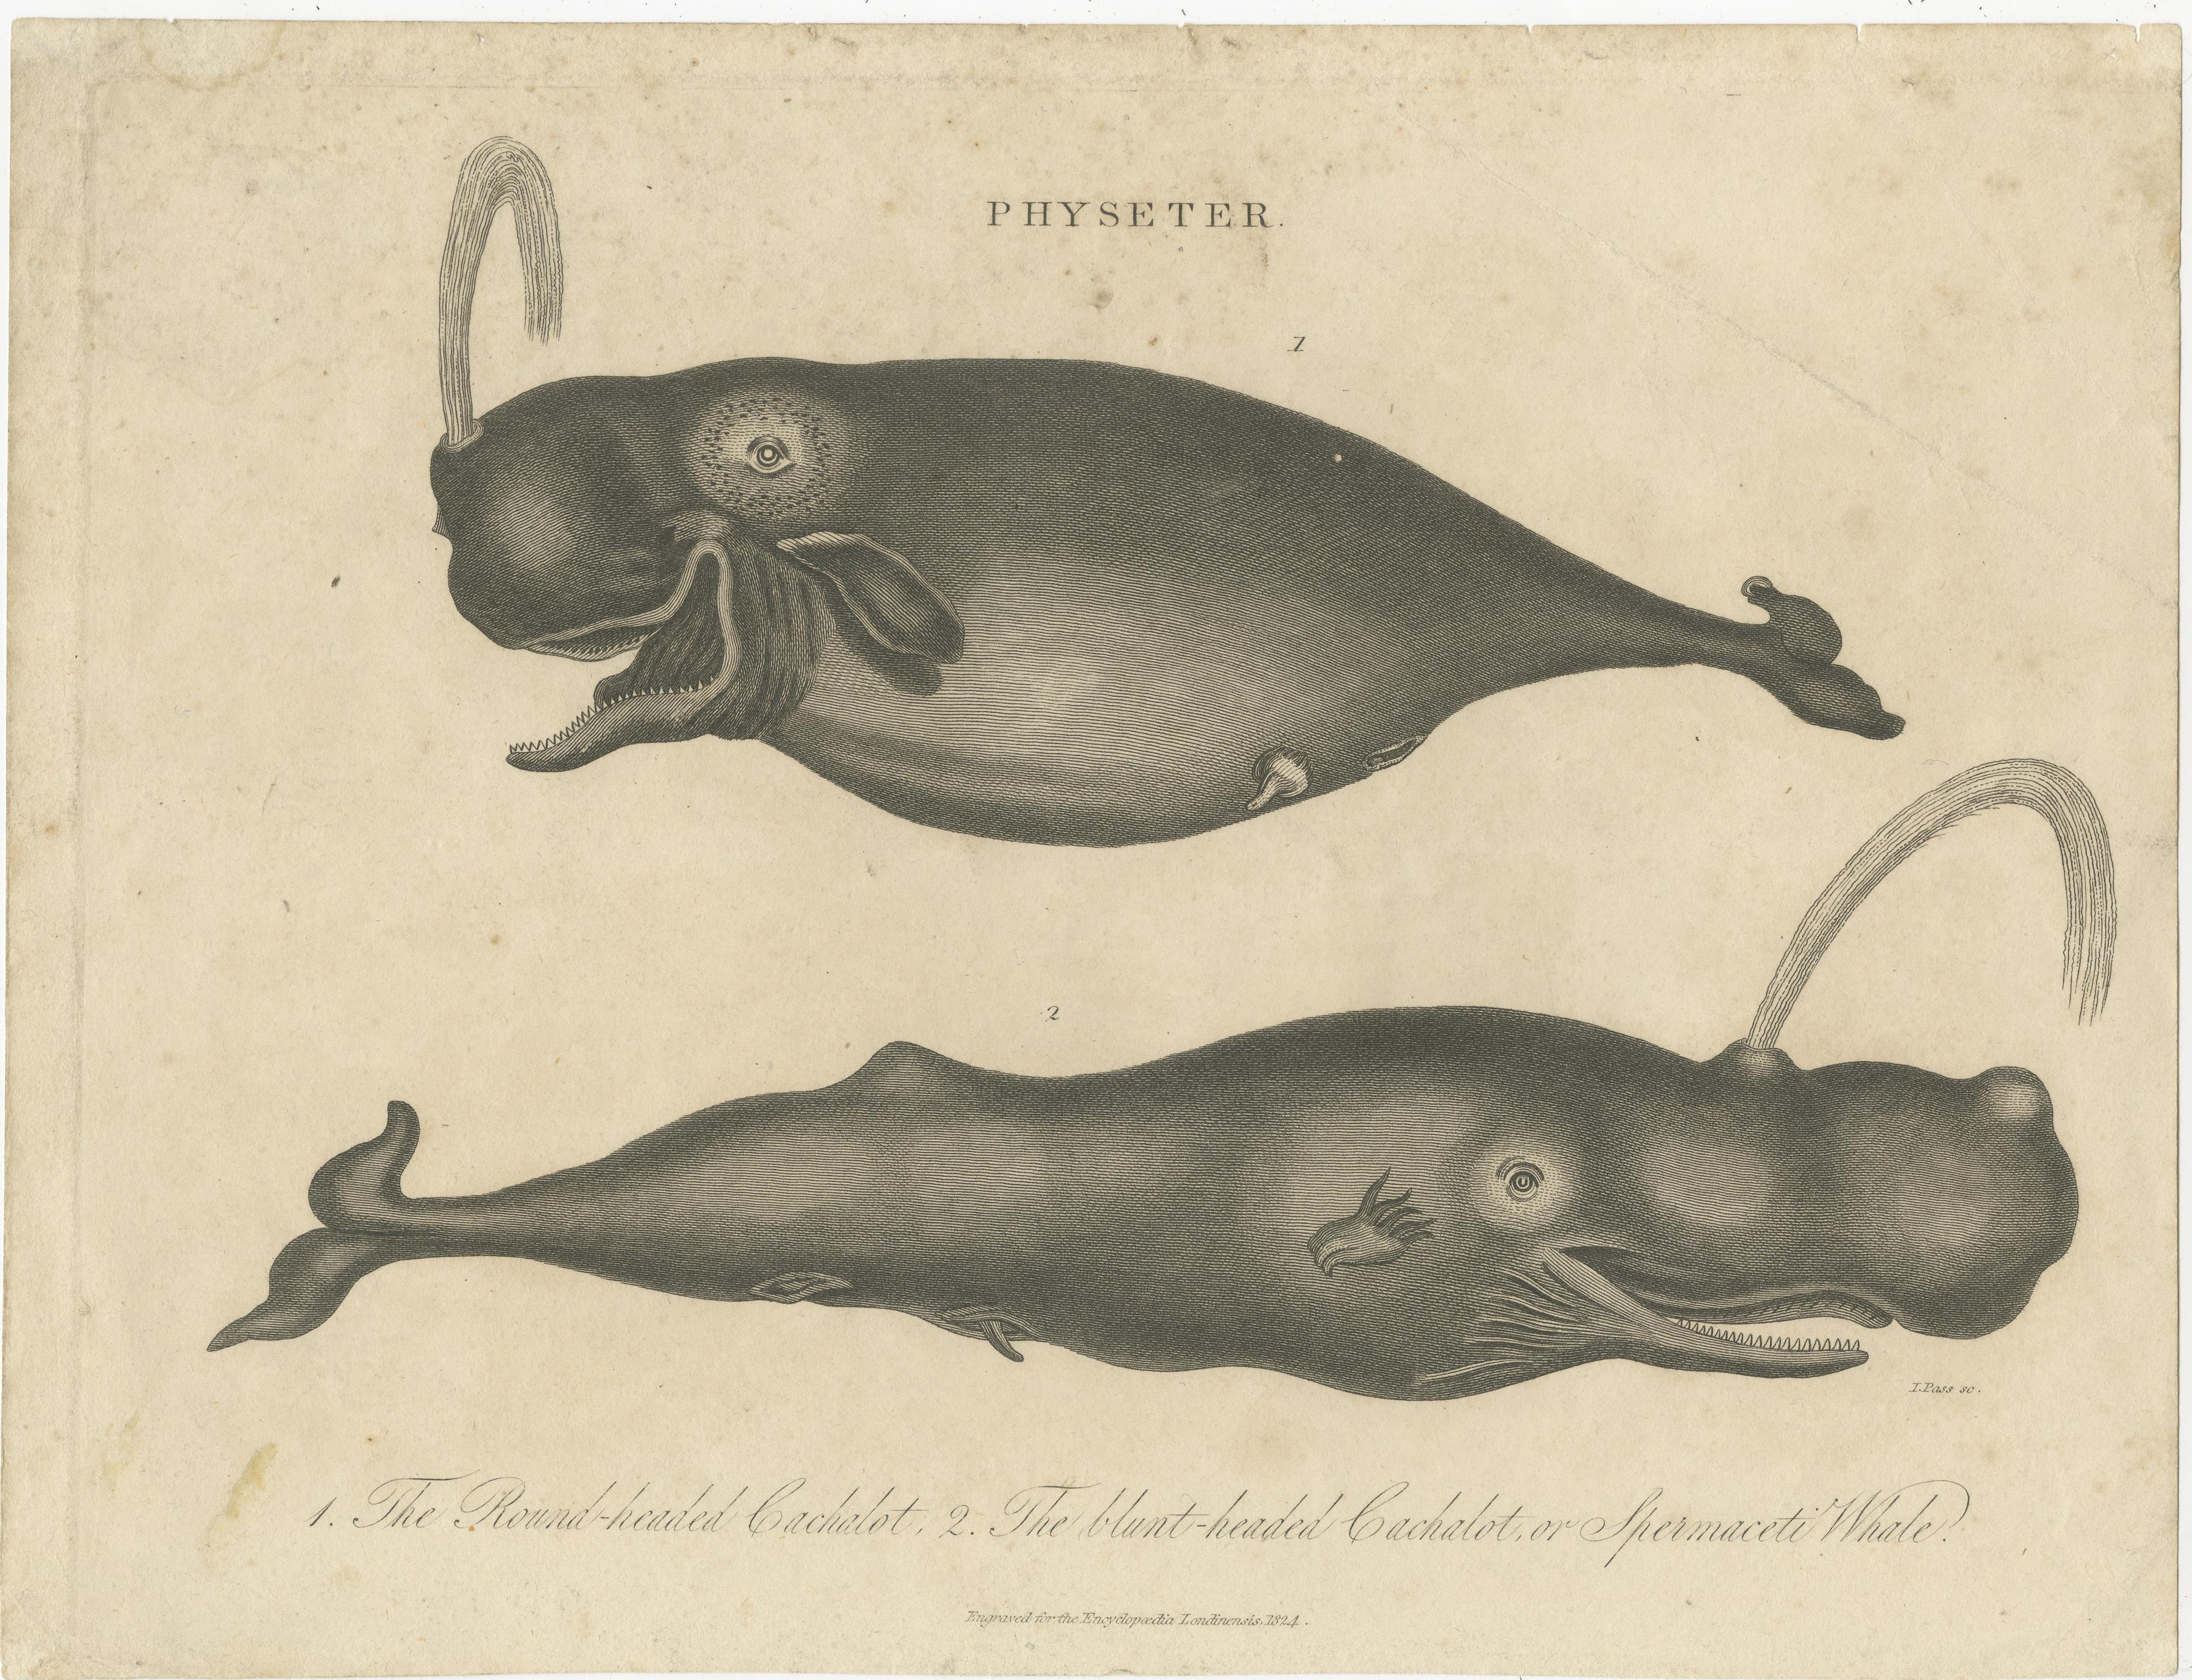 Antique print titled 'Physeter'. Physeter is a genus of toothed whales. There is only one living species in this genus: the sperm whale (Physeter macrocephalus). [here as Cachalot whales] Two fossil species are currently known that are placed in the